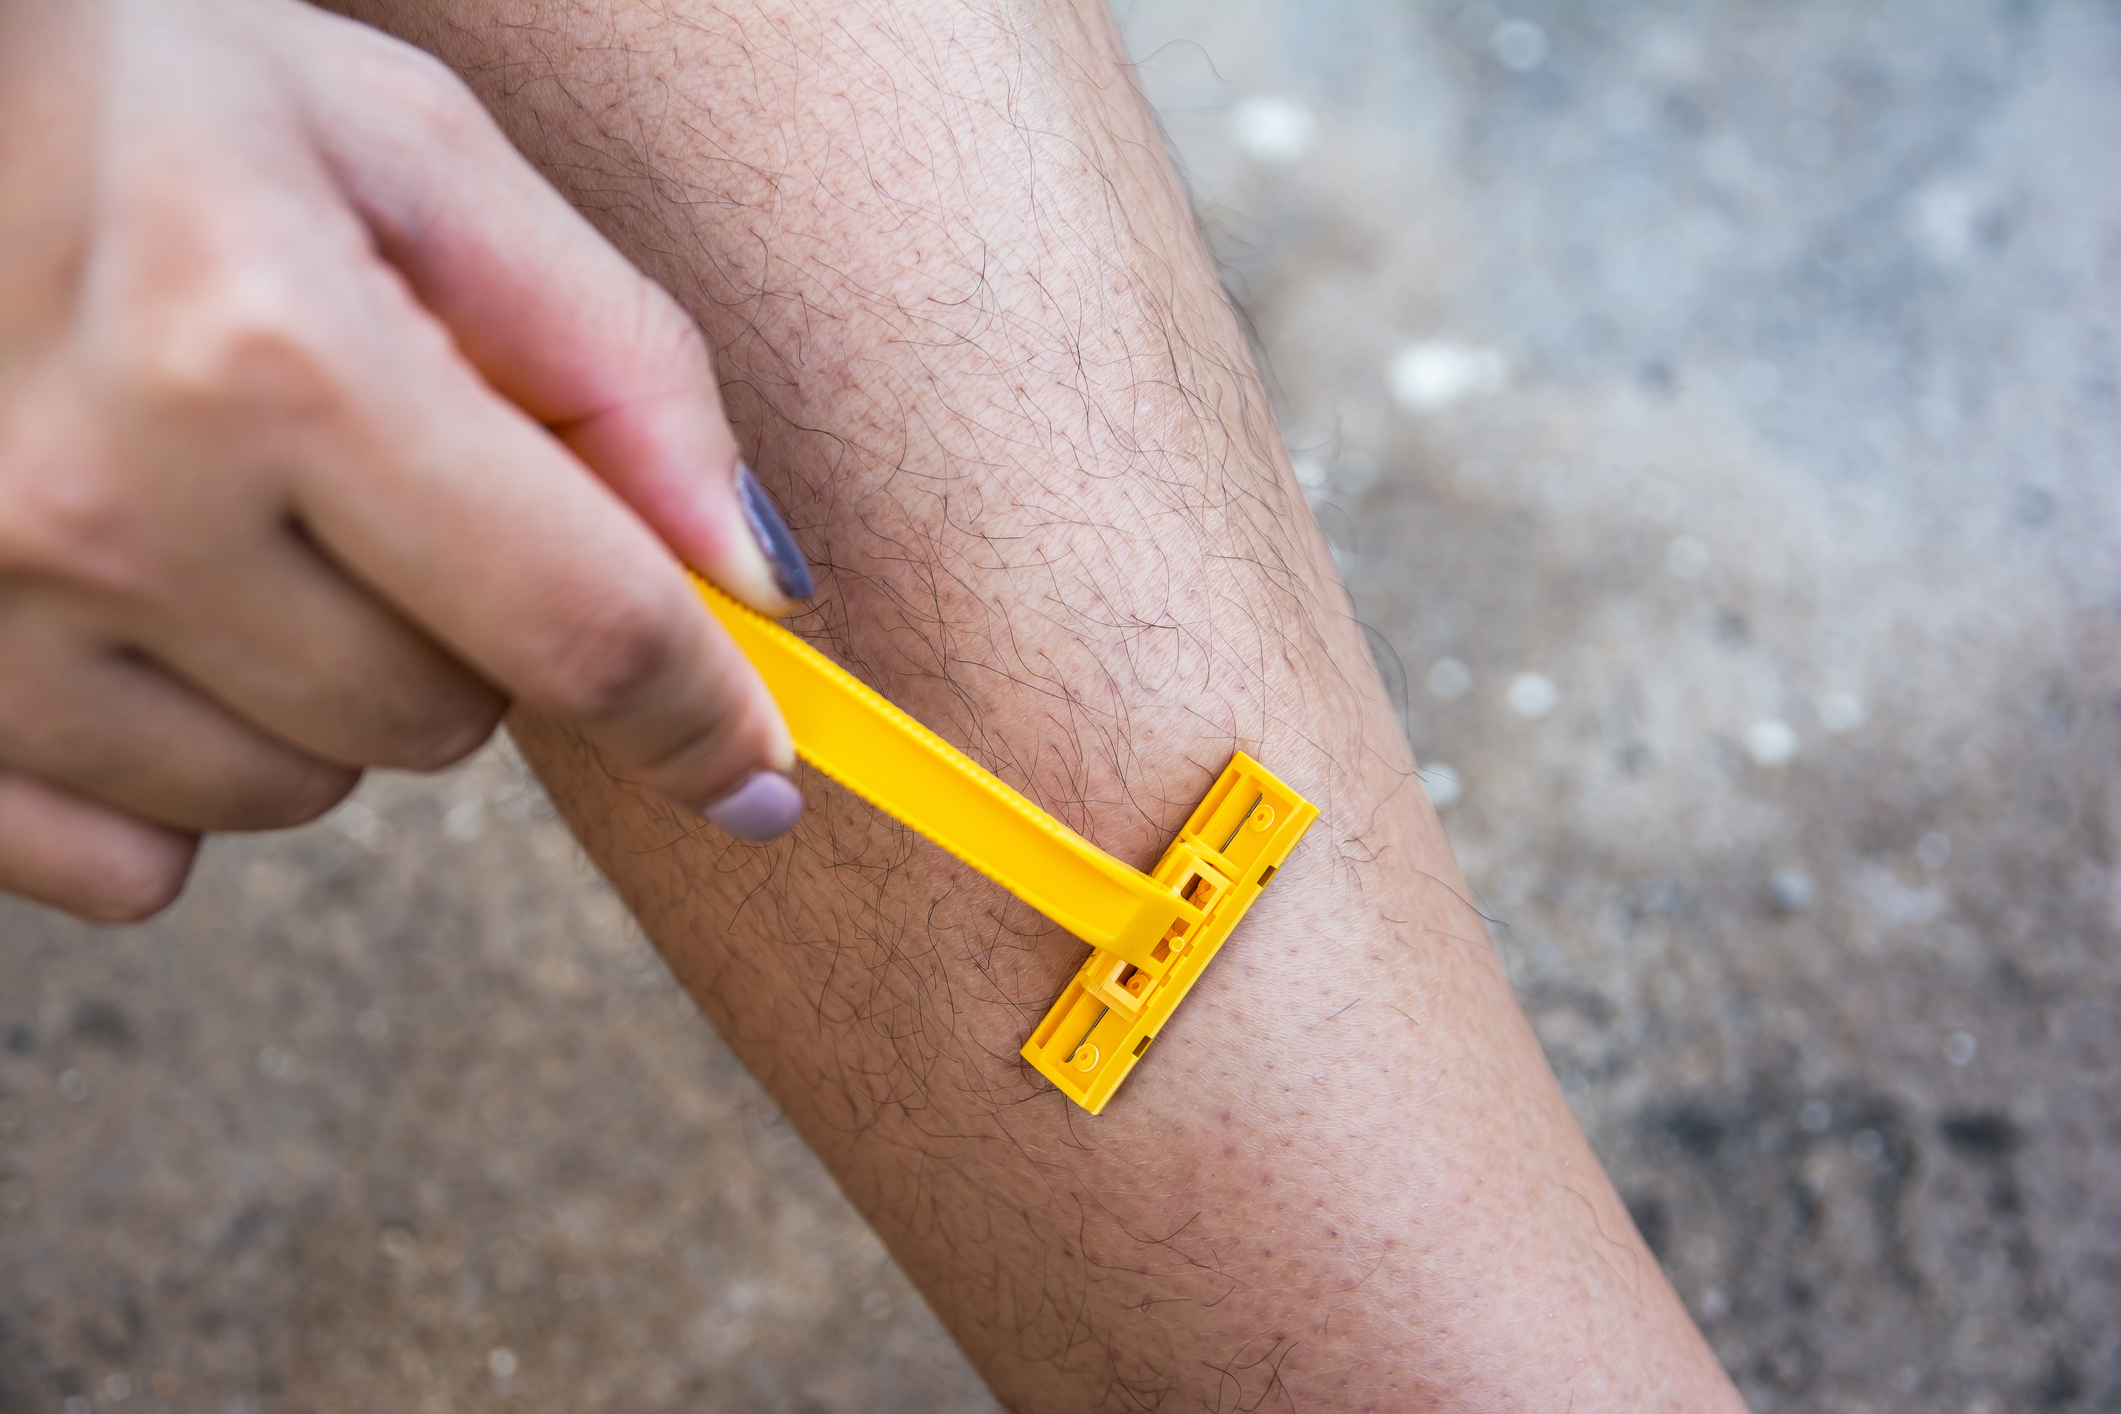 A close-up of a person using a yellow razor to shave their leg